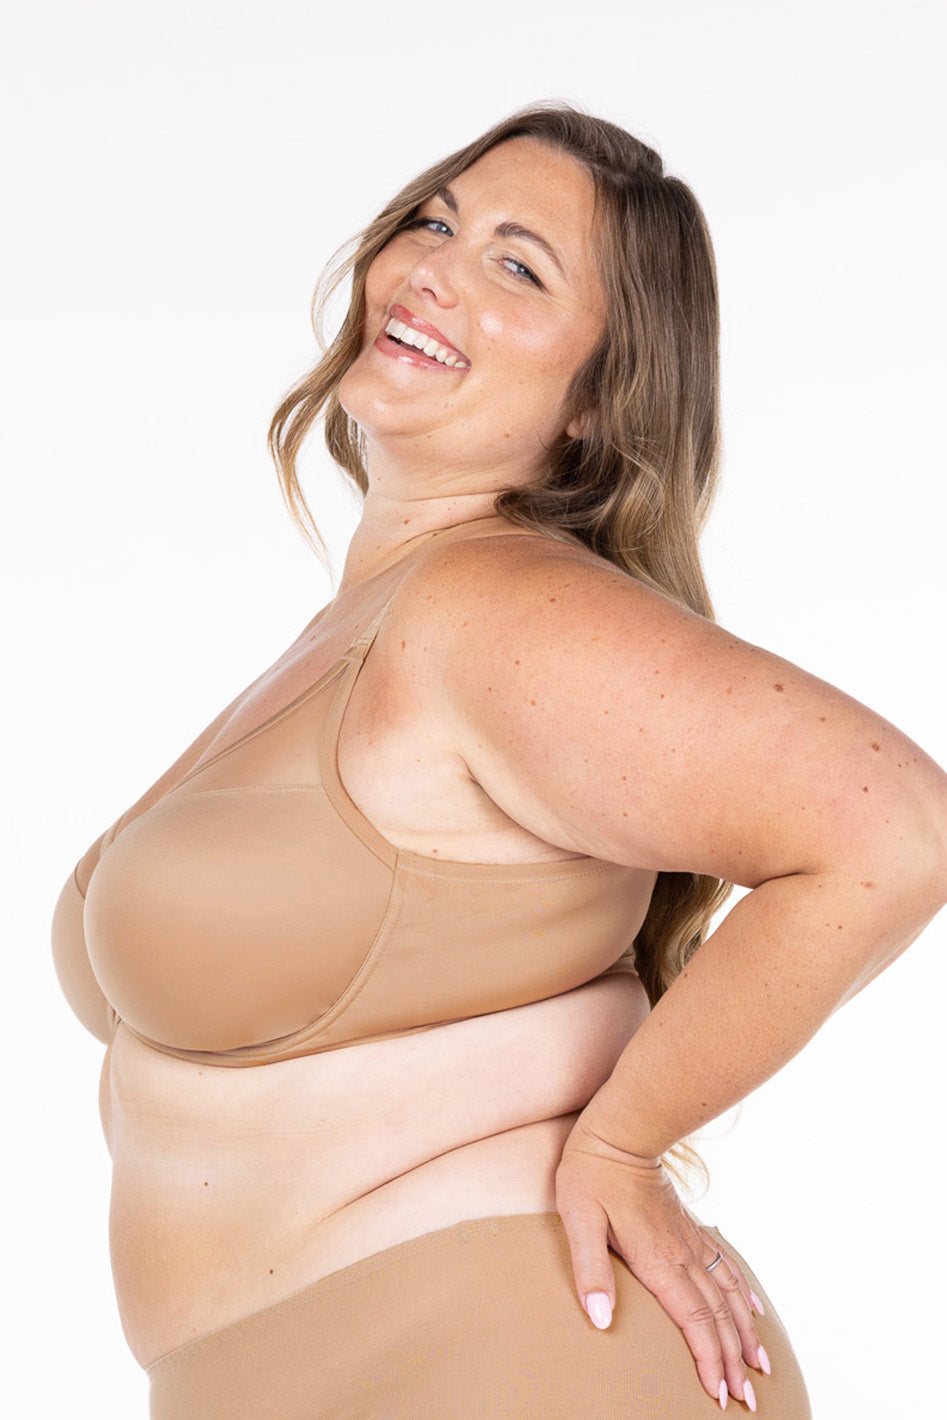 Spacer Air Shea FlexWire Molded Unlined Bra @Charlotte wears Cafe au Lait in 40H -Underbust: 40", Leaning Bust: 50", Standing Bust: 49"  #color_cafe-au-lait